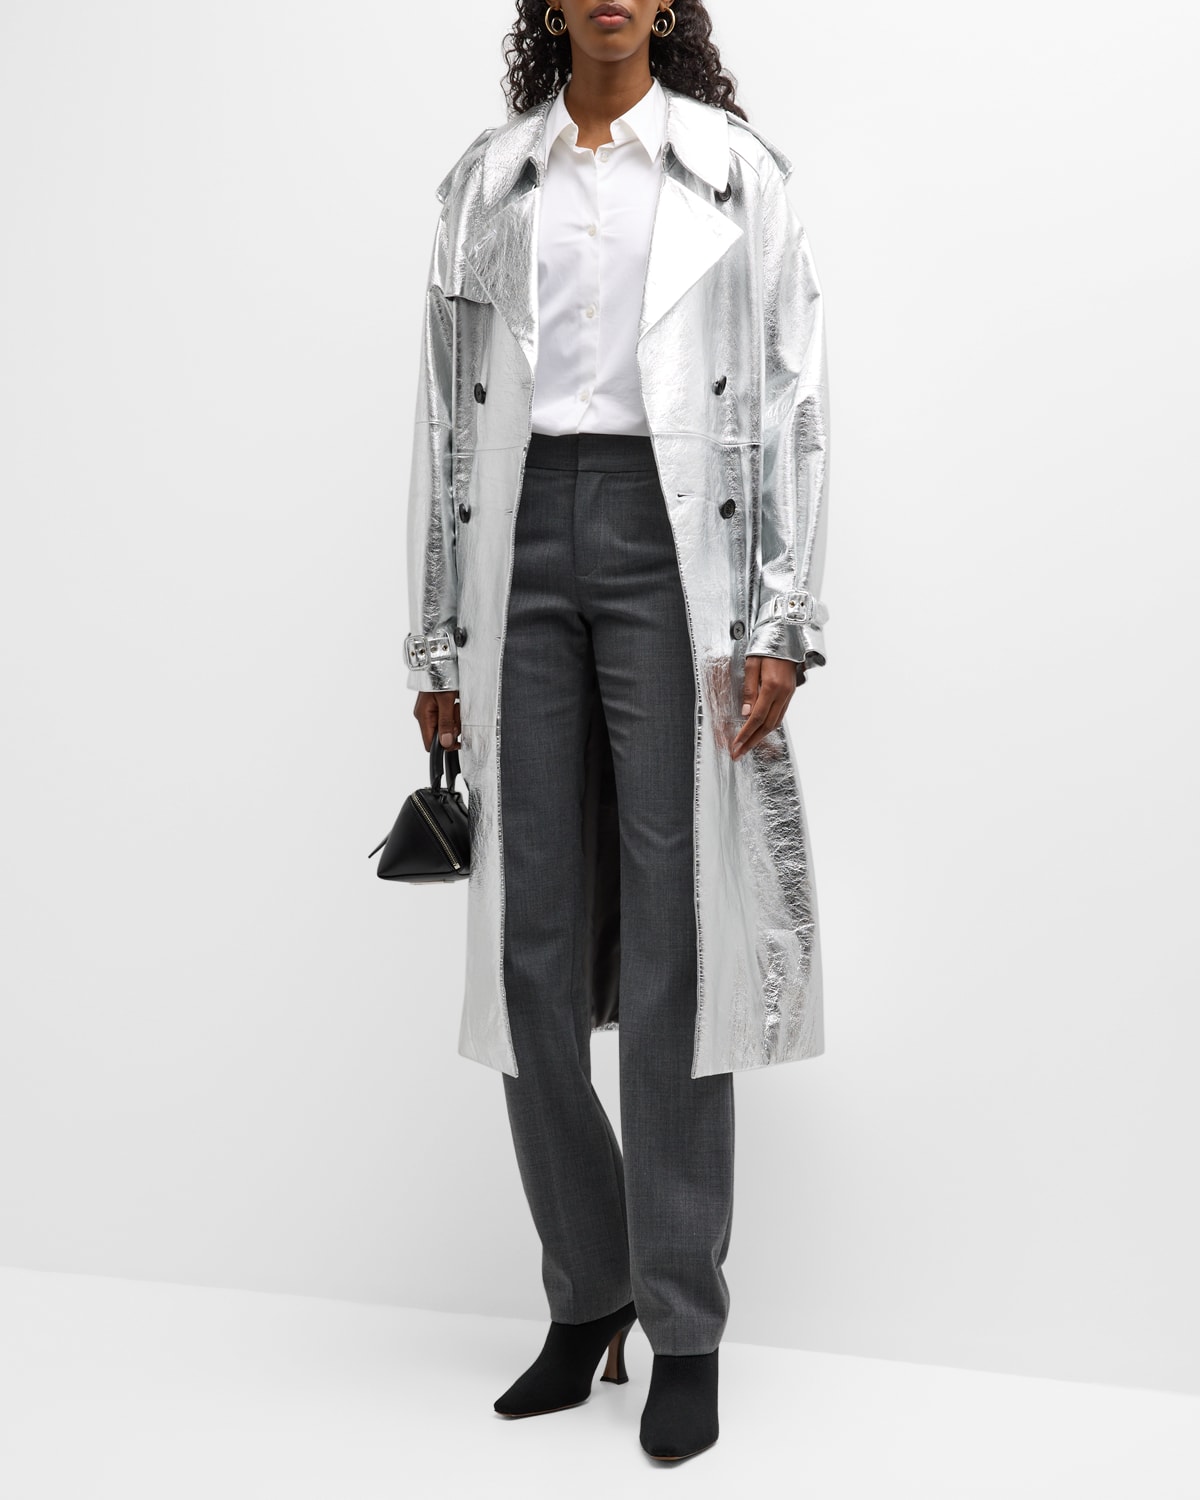 Burberry Harehope Belted Leather Trench Coat | Neiman Marcus